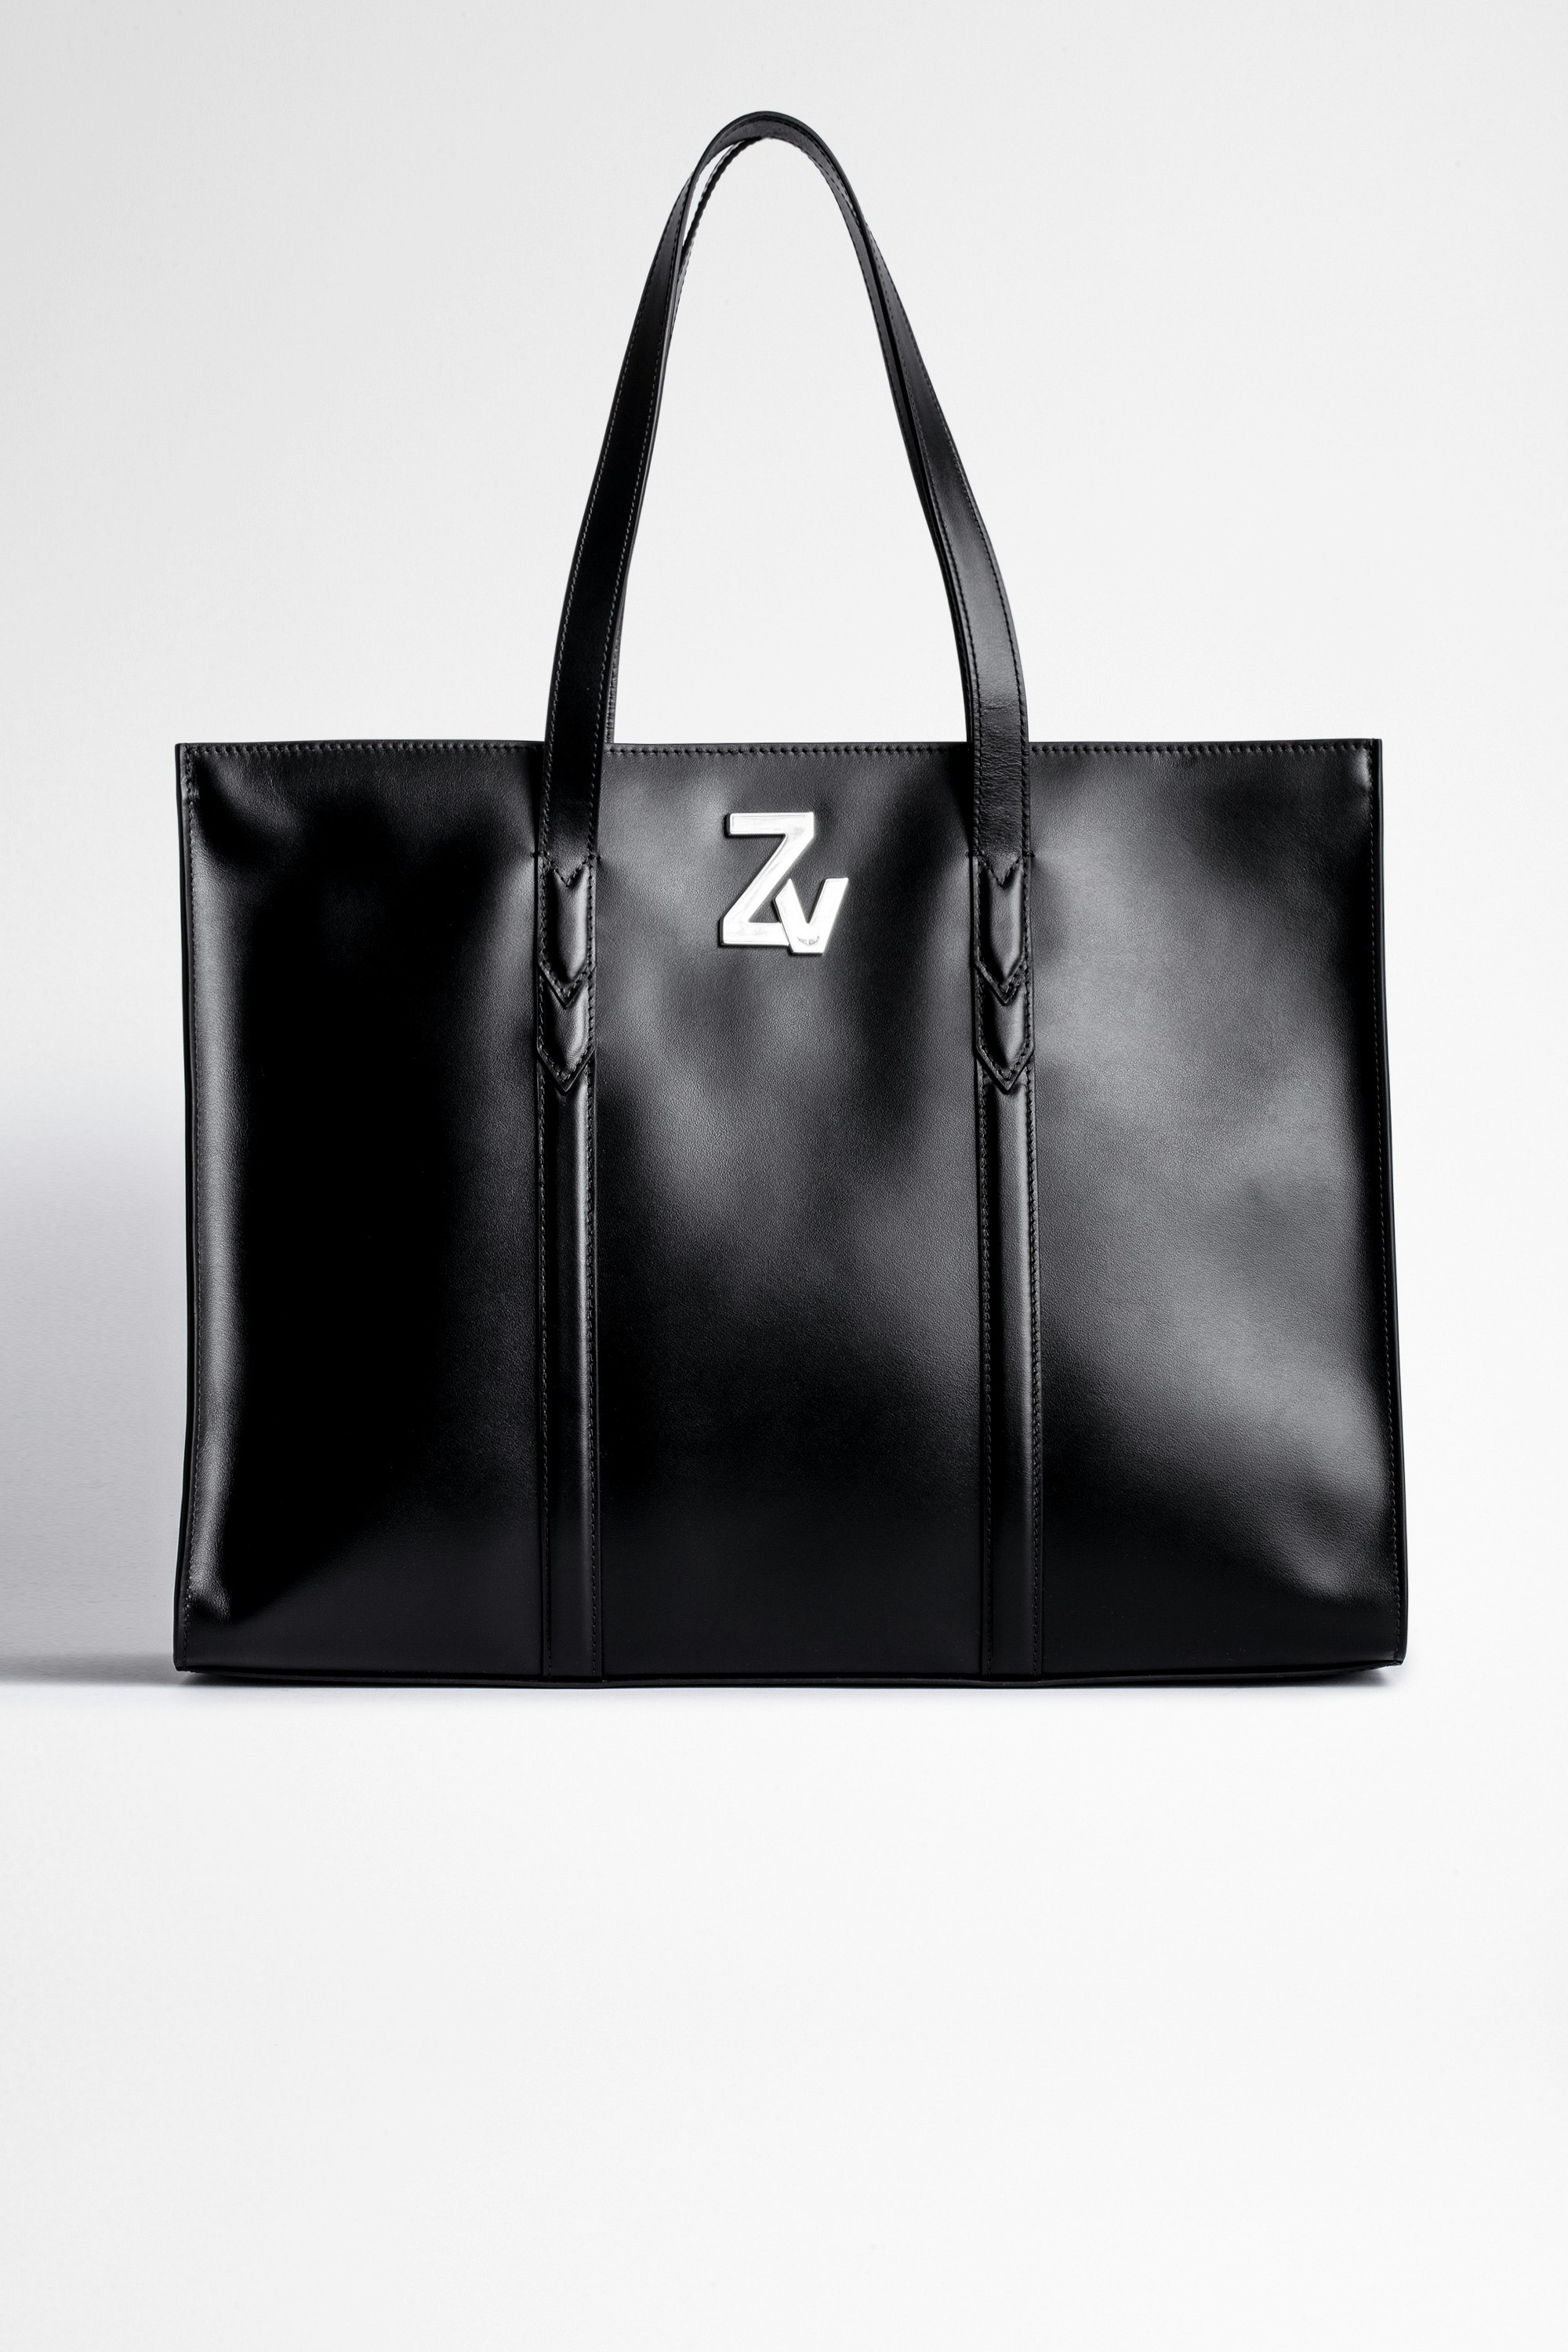 ZV Initiale Le Tote Bag Women’s Le Tote bag in smooth black leather